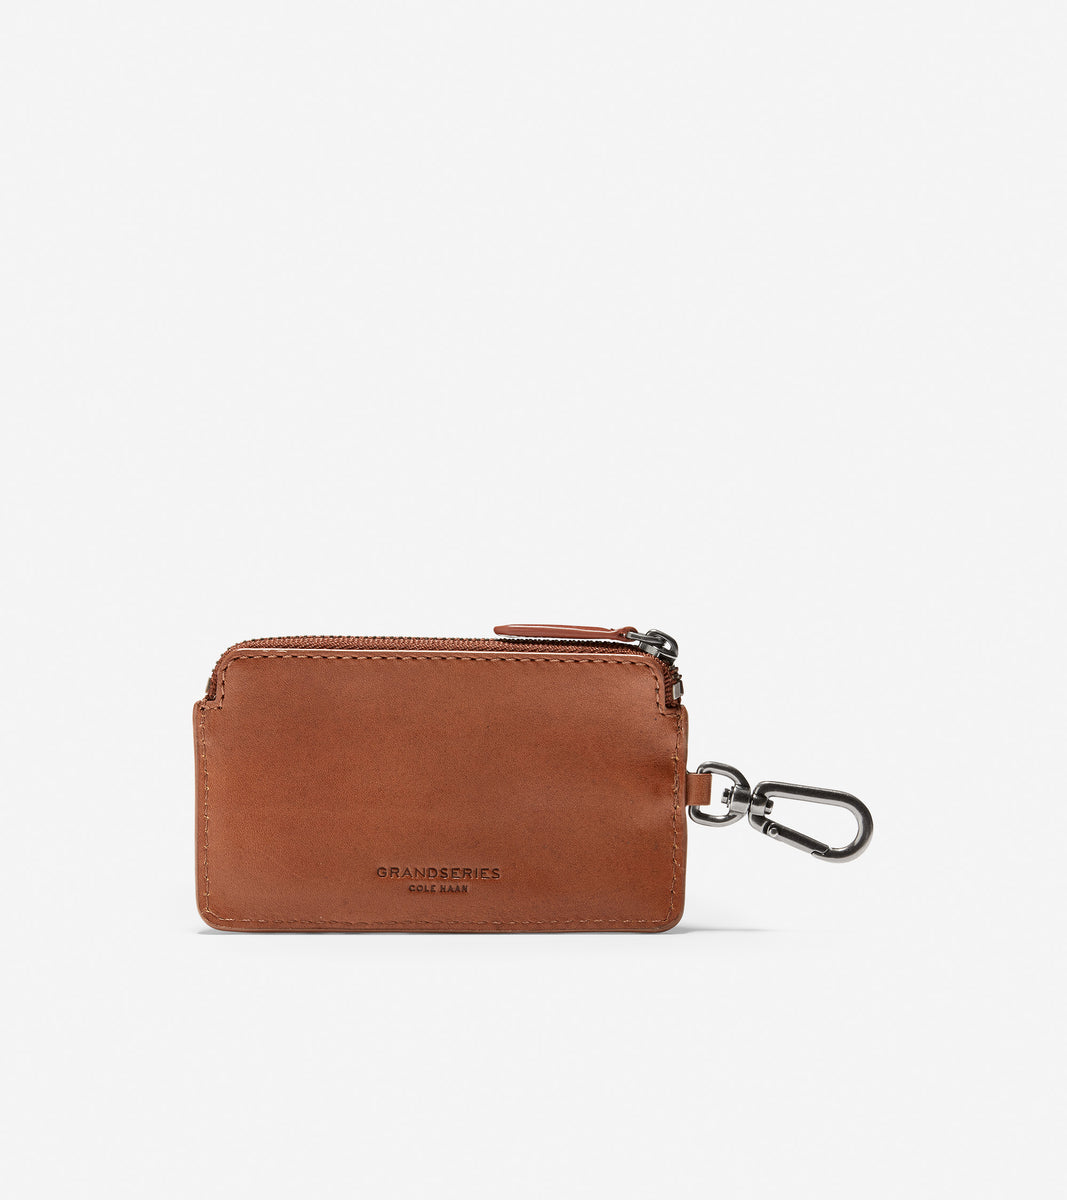 ColeHaan-GRANDSERIES Leather Zip Card Case With Key Ring-f11441-British Tan